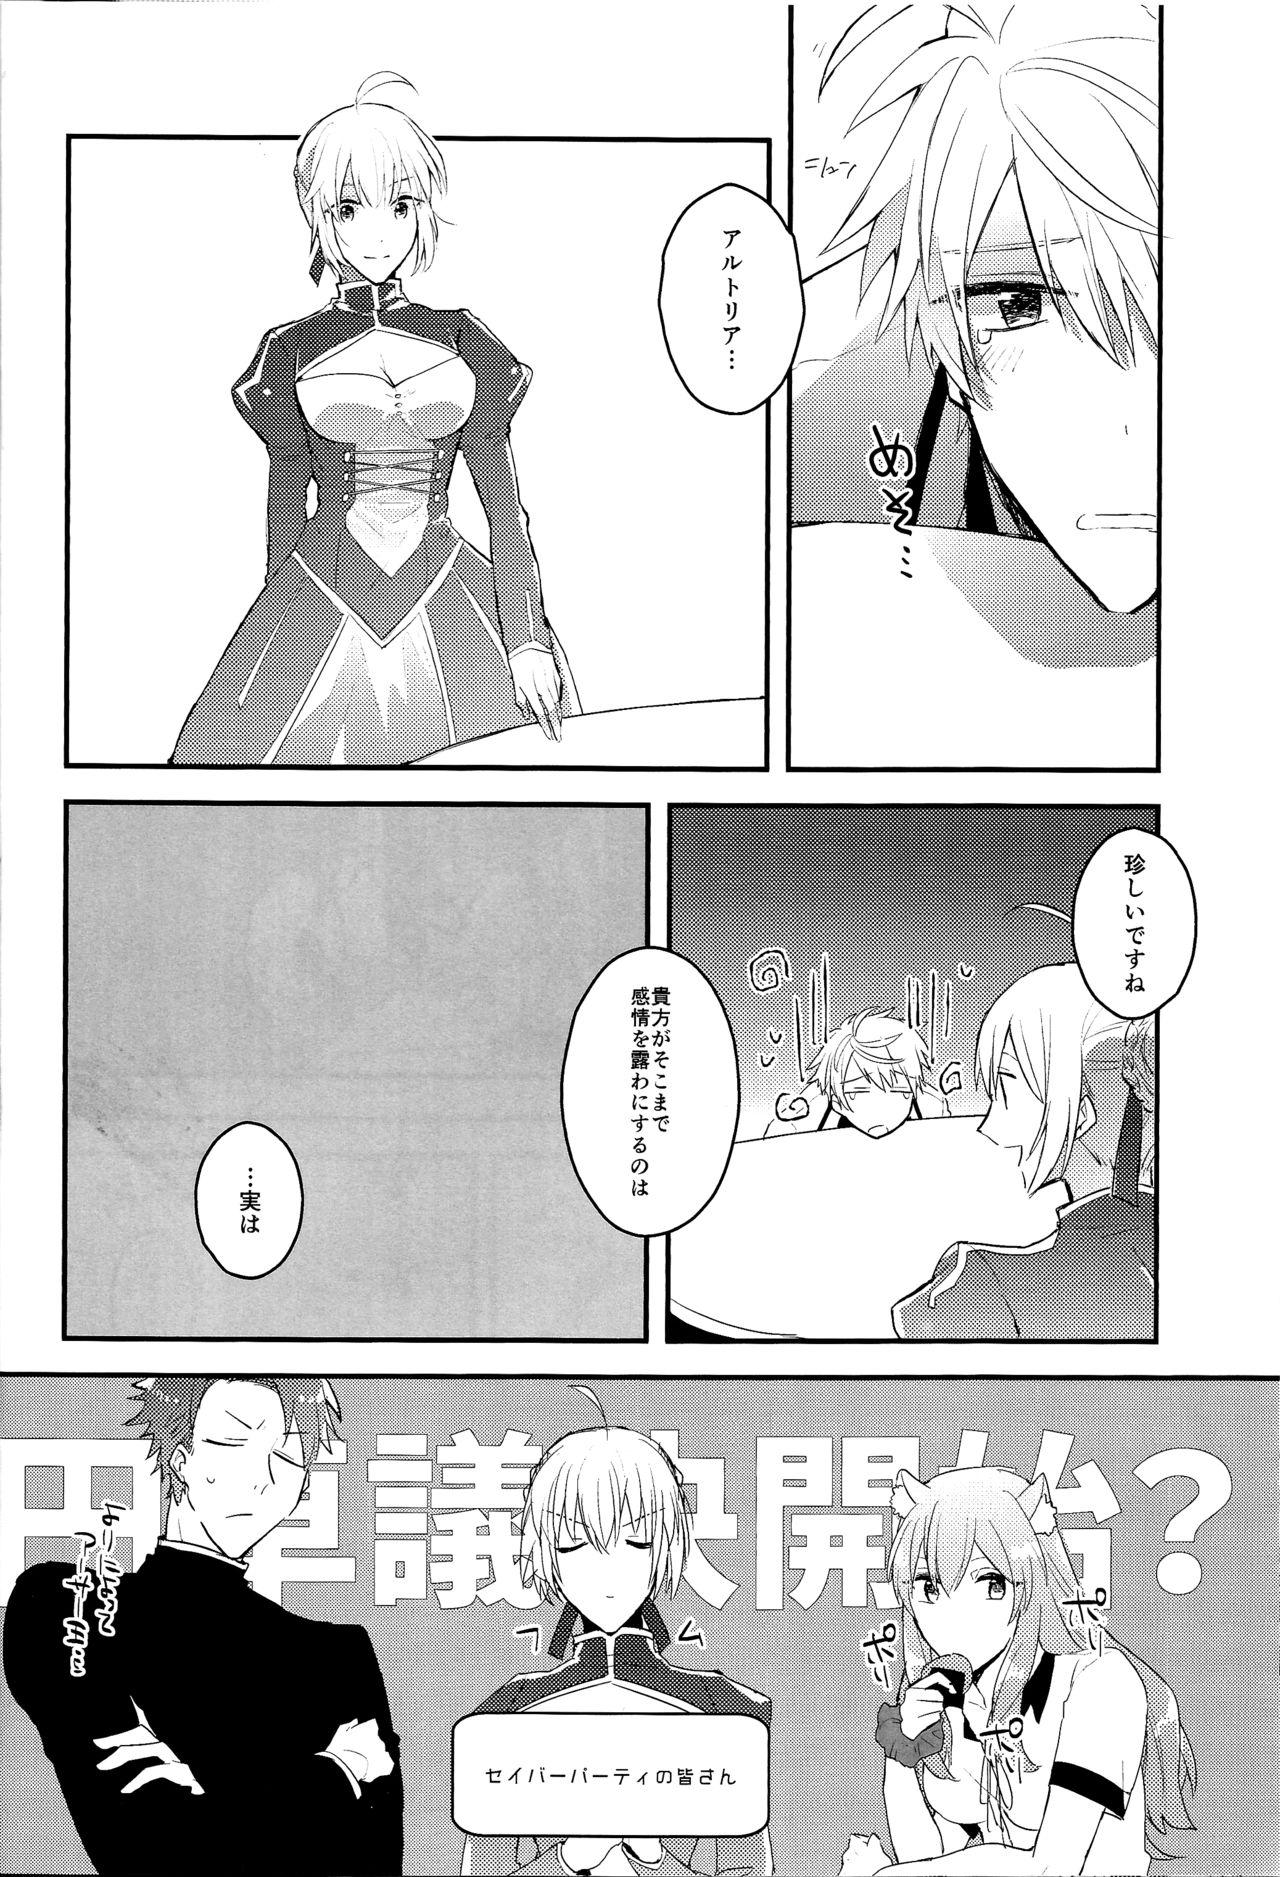 Comedor I Am Worthy Of You - Fate grand order Gay Physicals - Page 5